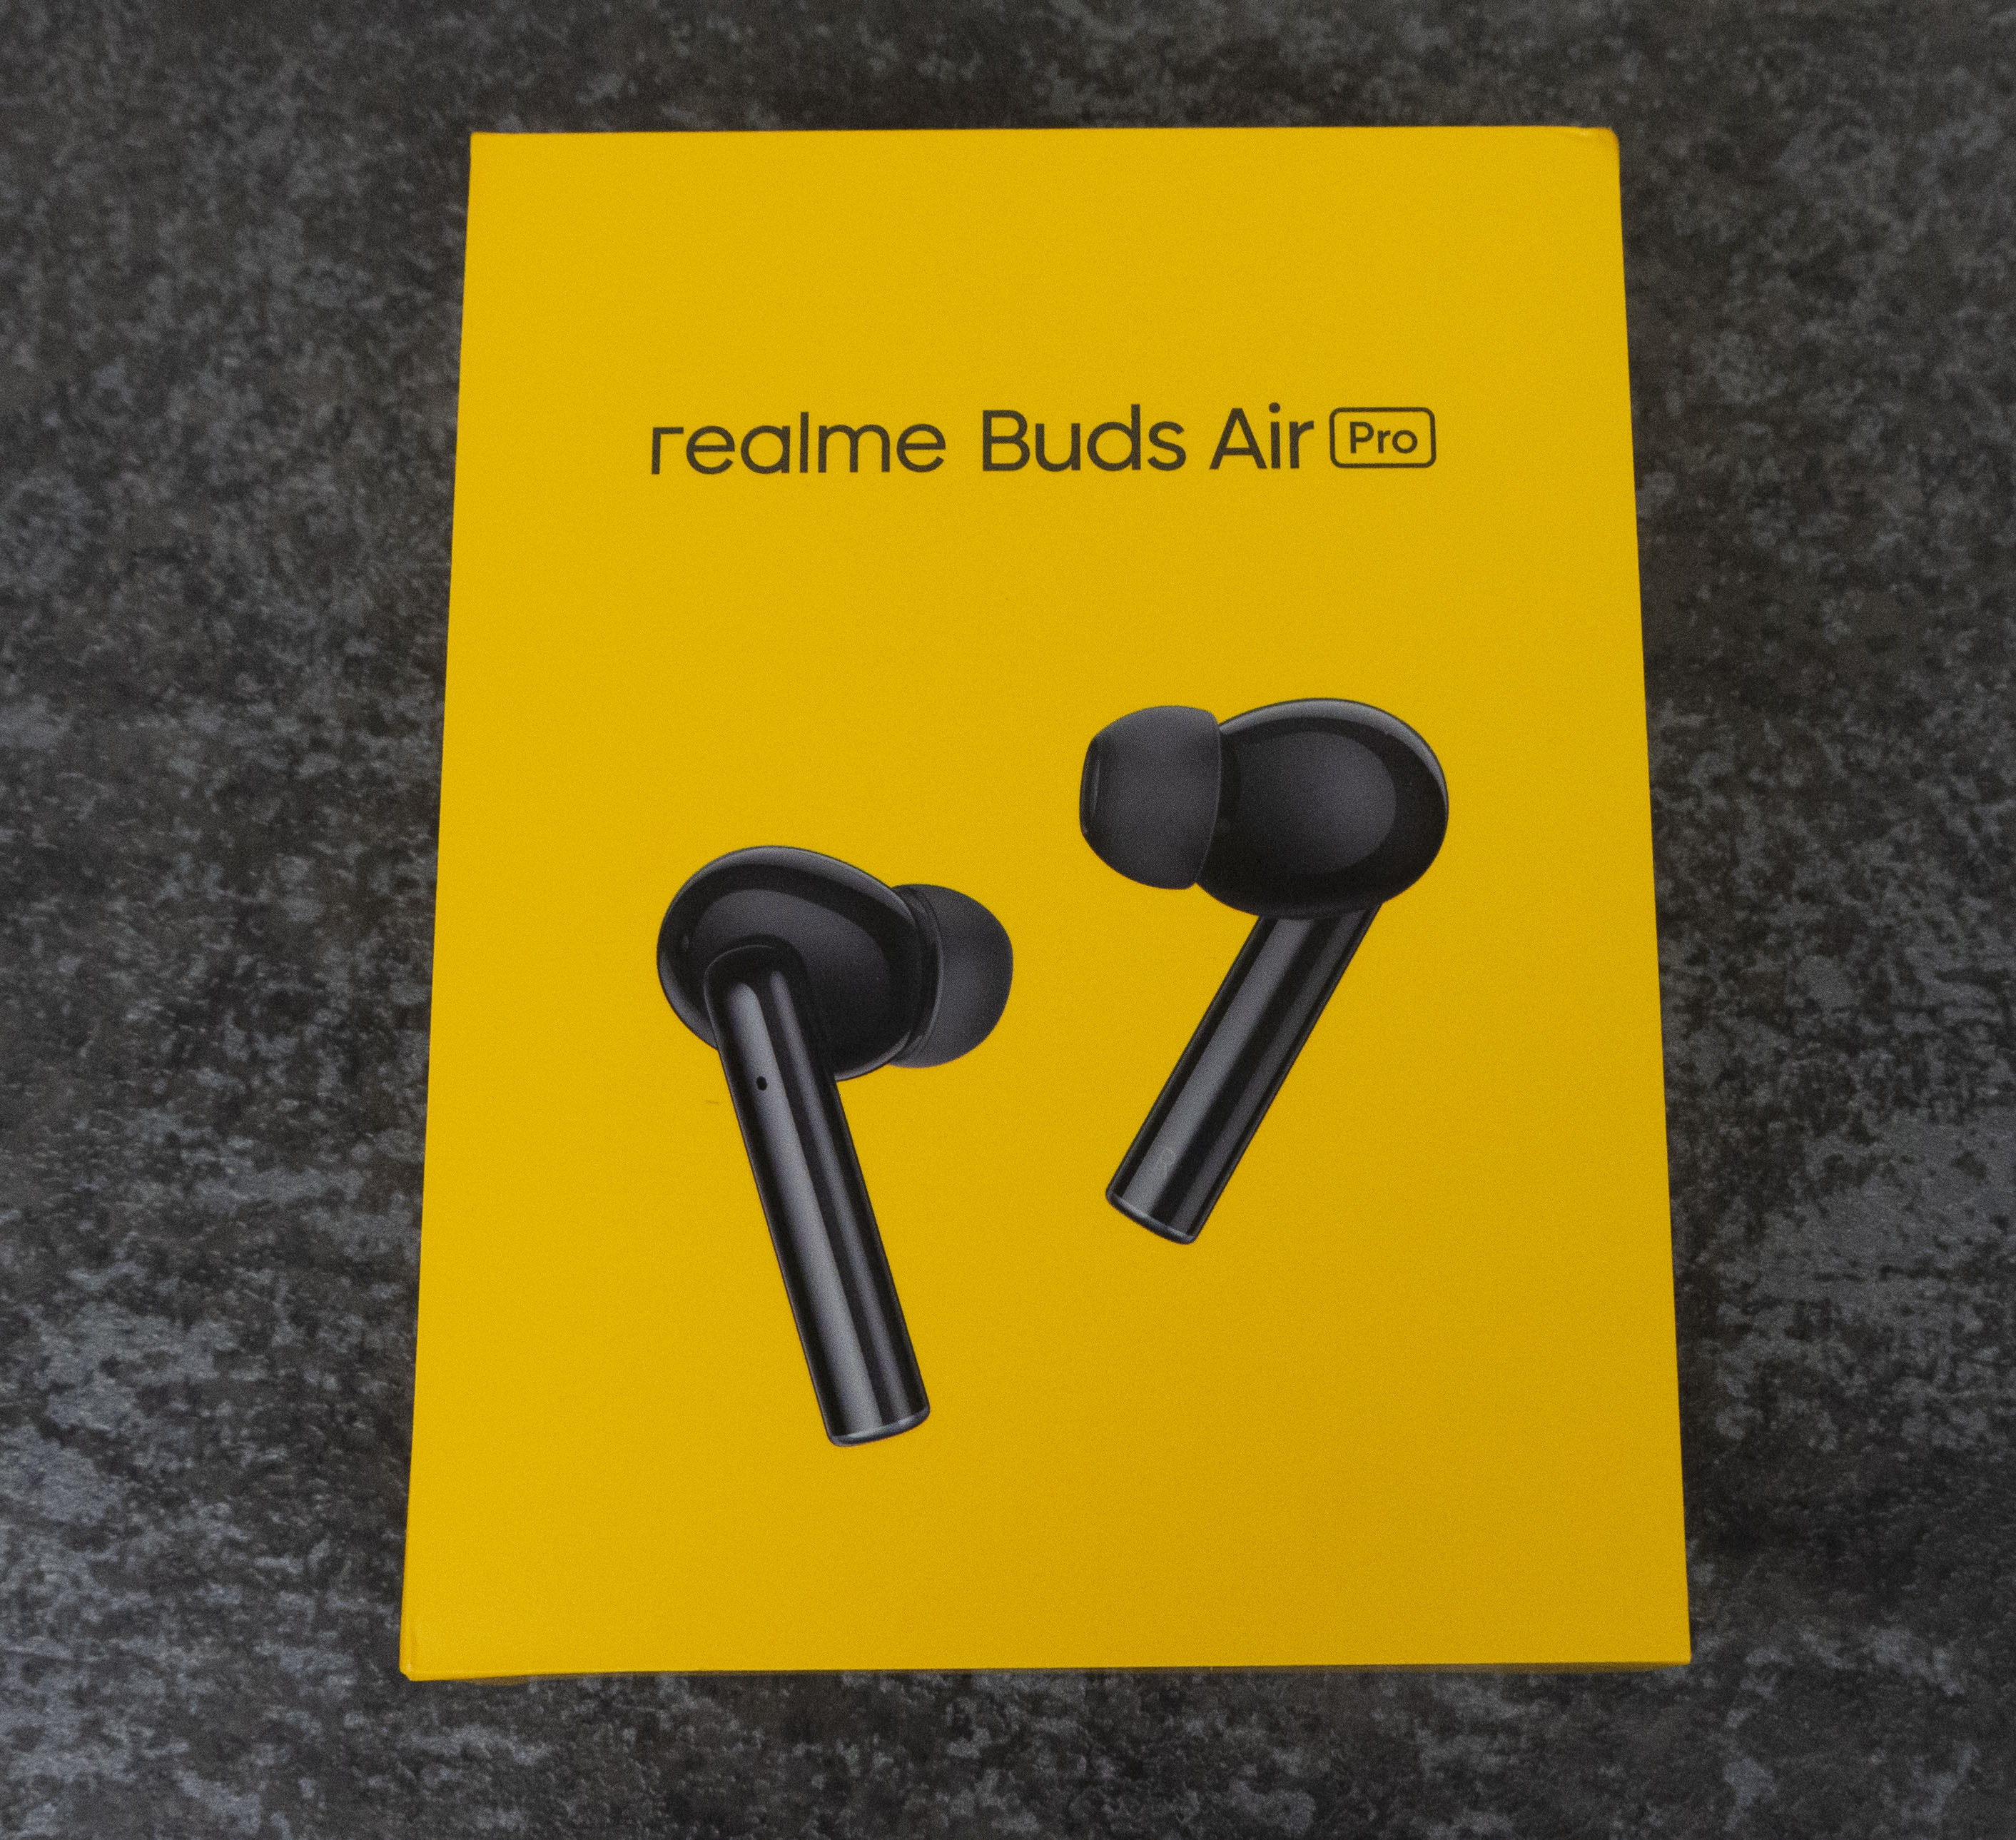 Are the realme Buds Air Pro really Pro?